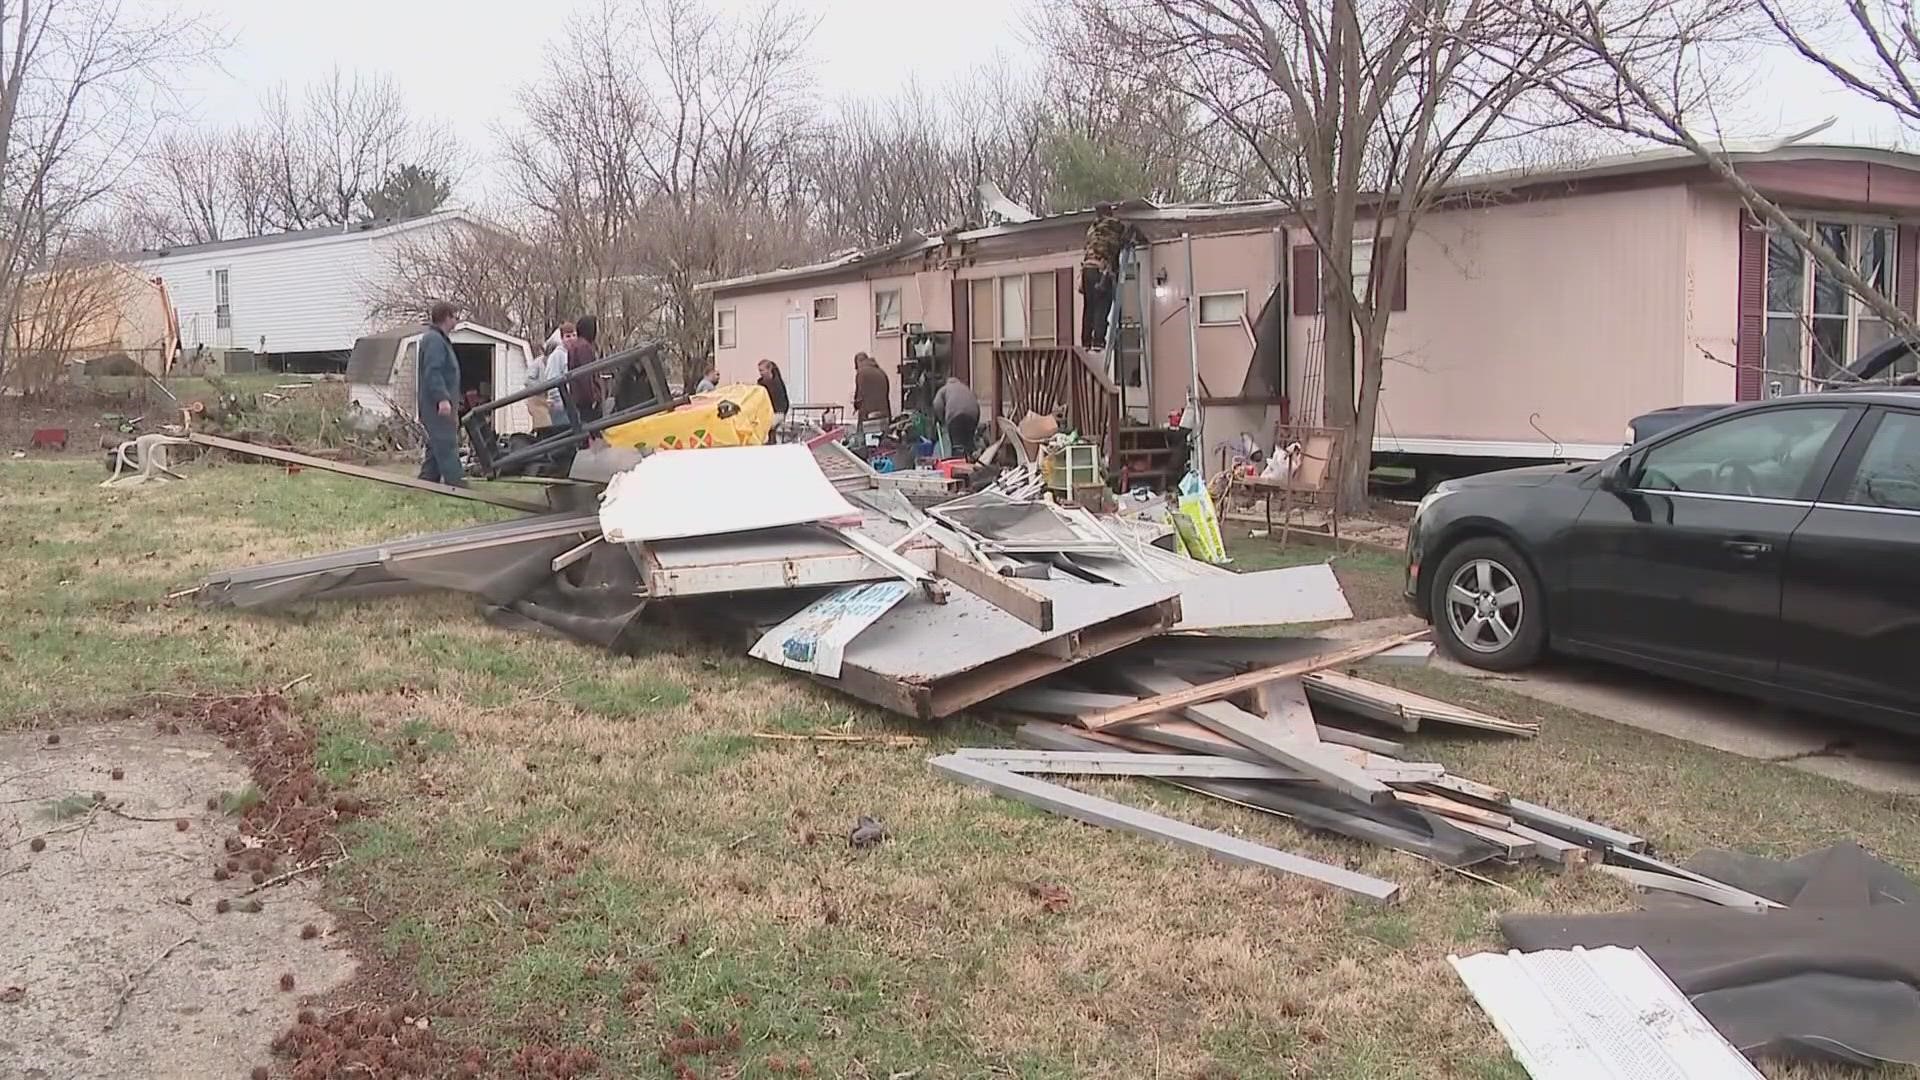 The National Weather Service confirmed an EF0 hit the town of Orient on Monday.